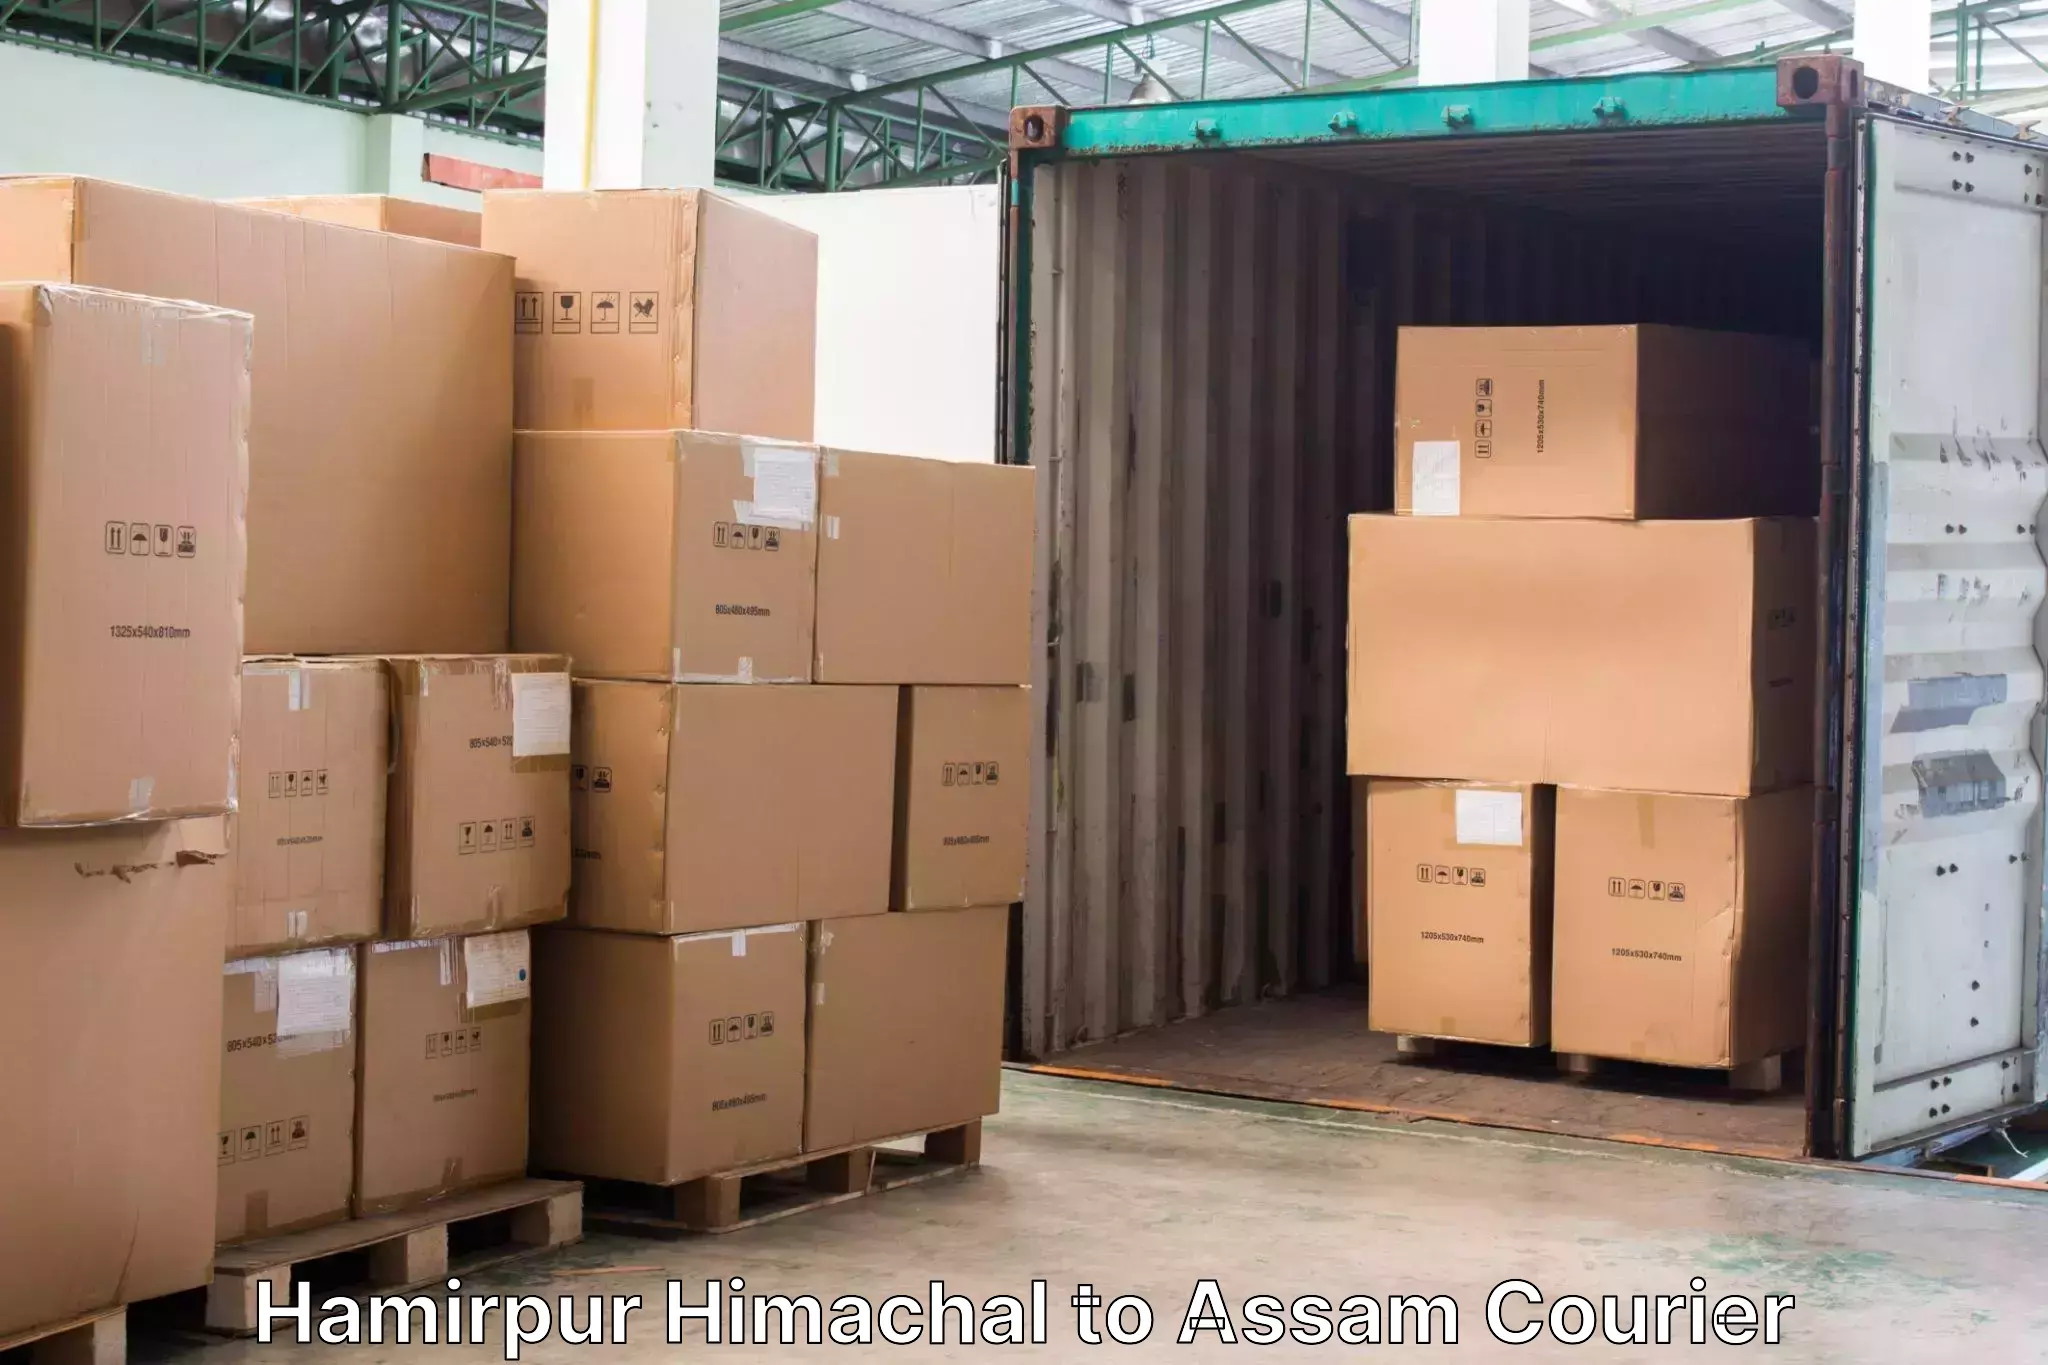 Online luggage shipping booking Hamirpur Himachal to Assam